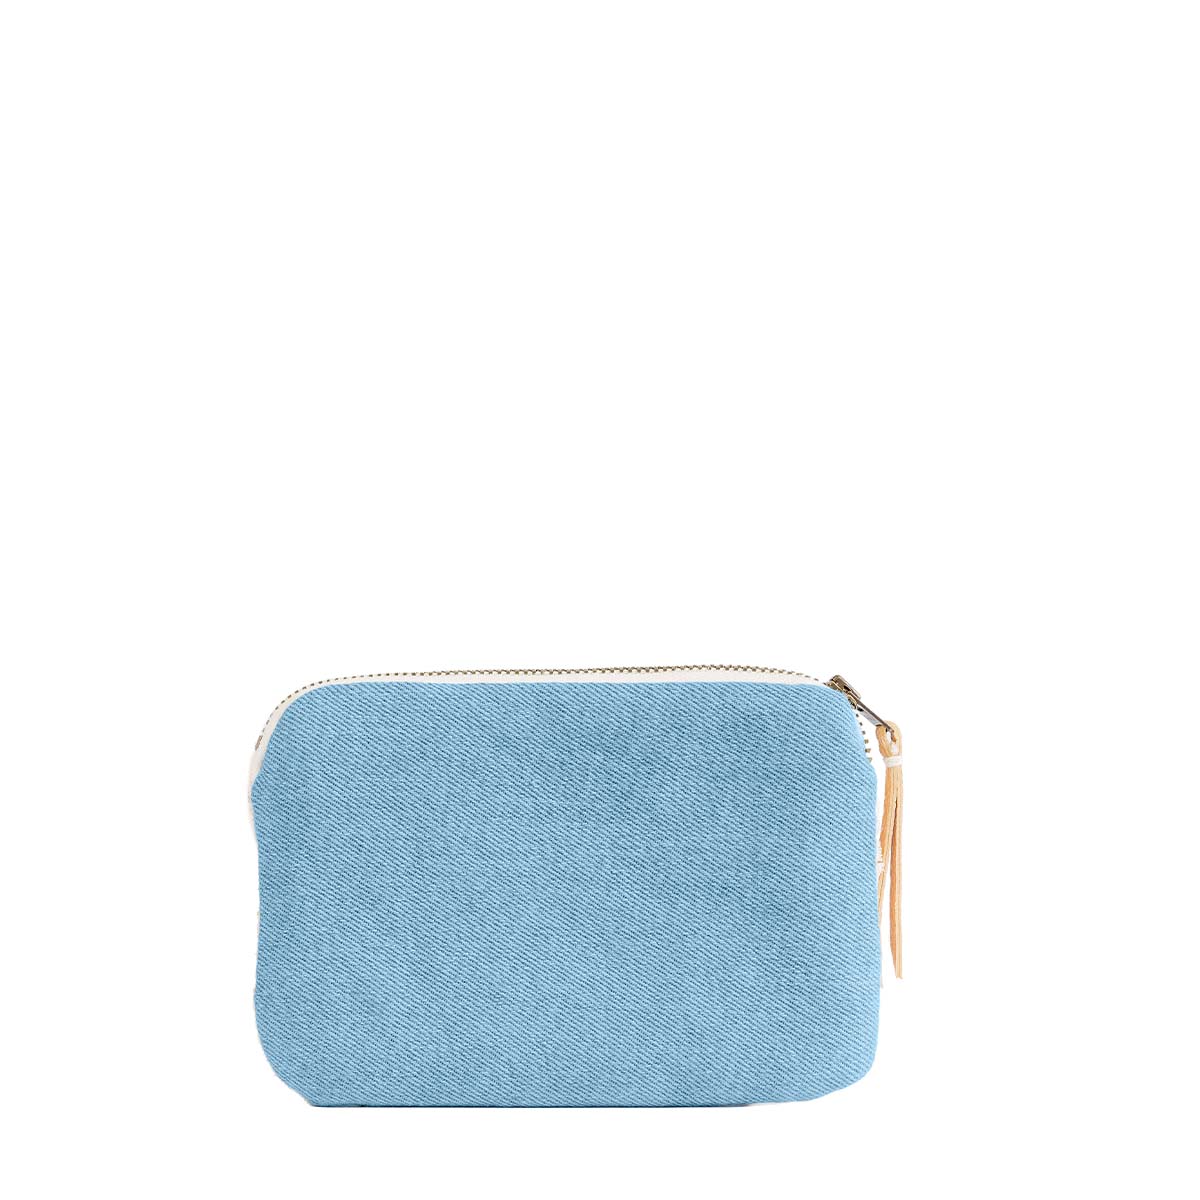 Back of the hand woven artisan Teresa Wallet in Spring Sherbert. The back has a solid sky blue color.